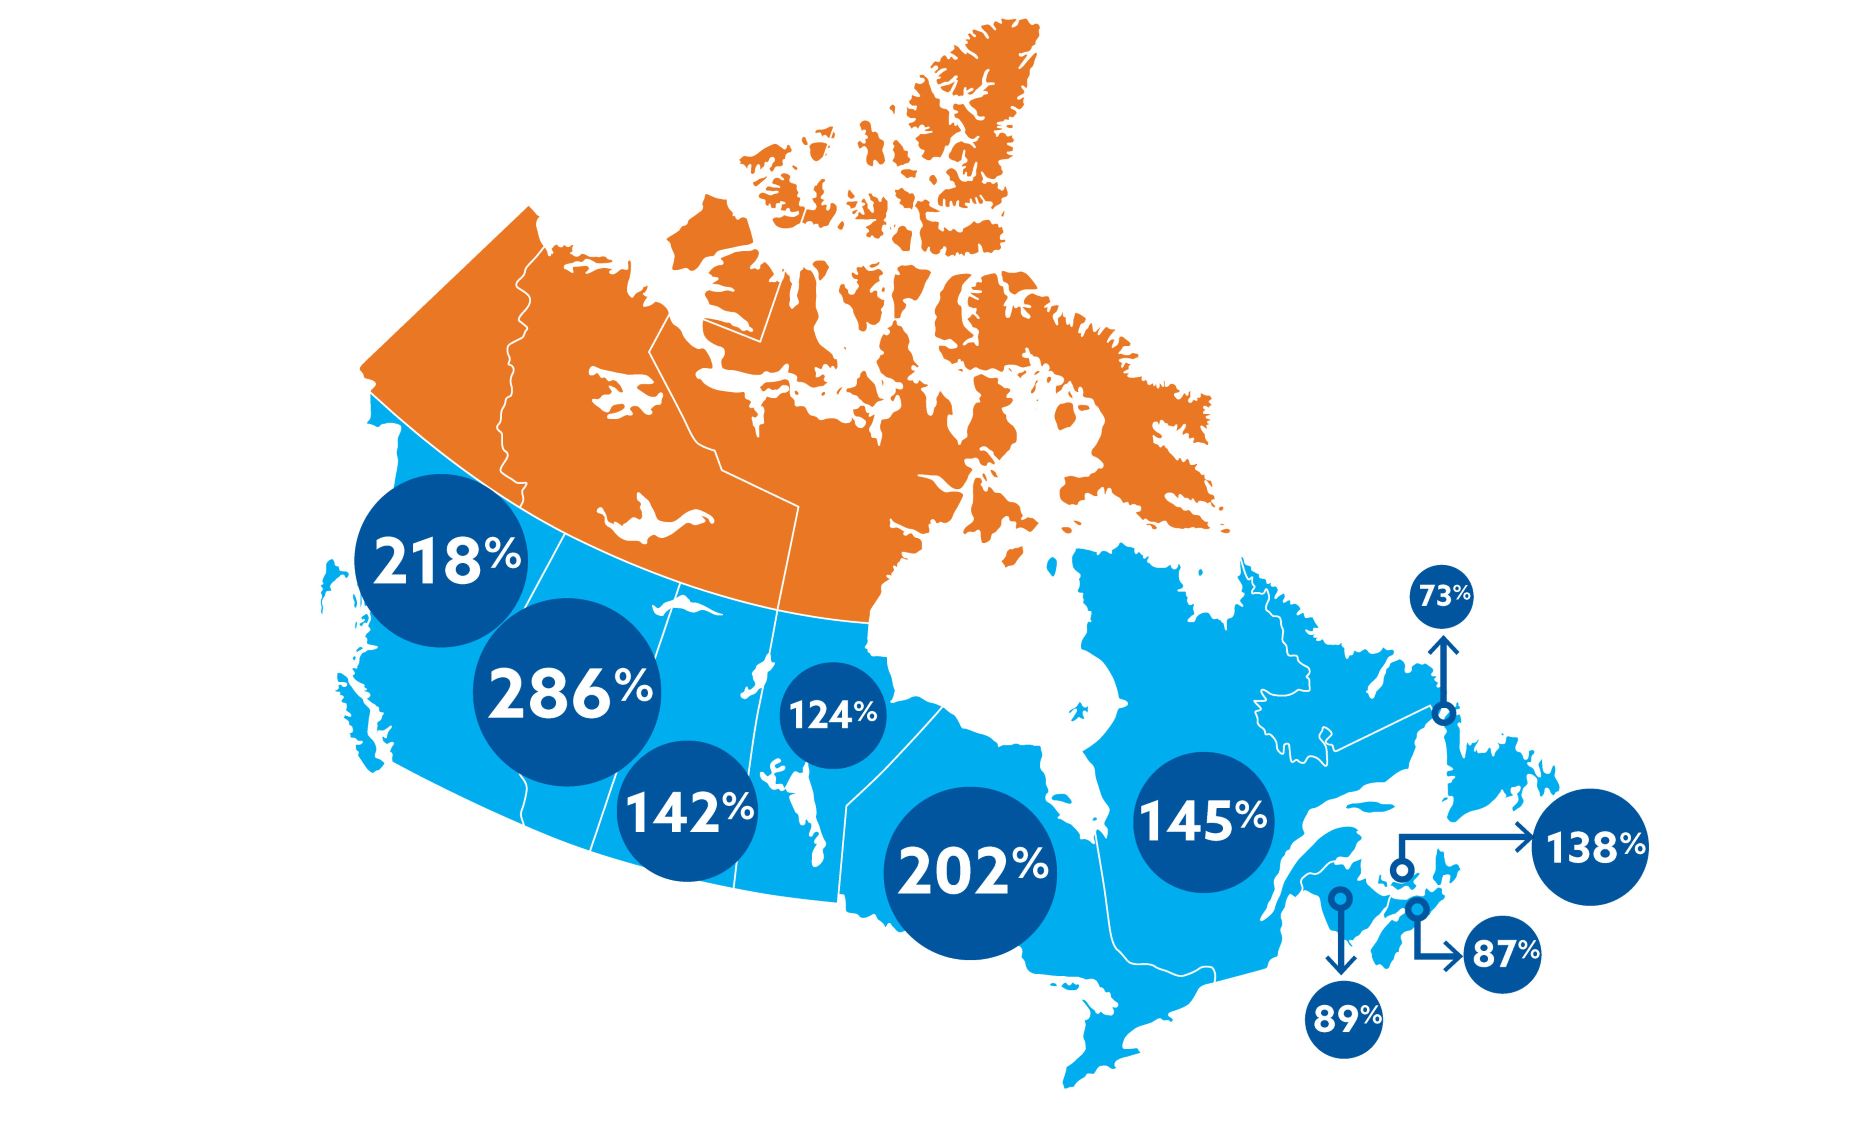 Map of Canada showing percentage increase in people with dementia by region.jpeg 